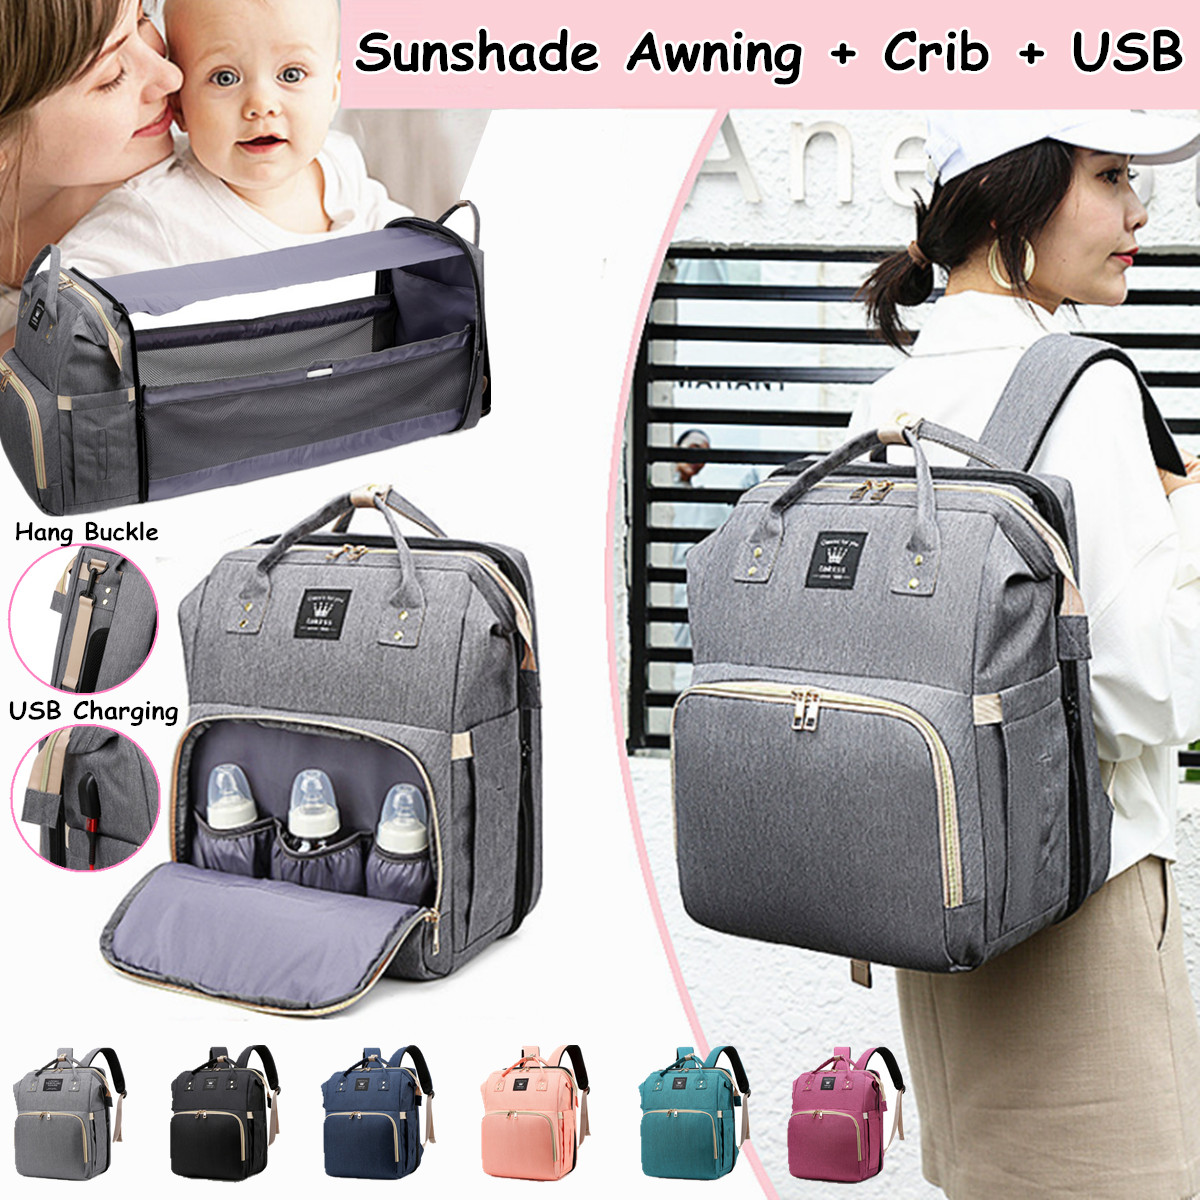 Multifunctional-2-IN-1-Large-Capacity-Foldable-Travel-with-Sunshade-Baby-Infant-Crib-Diaper-Macbook--1858195-1